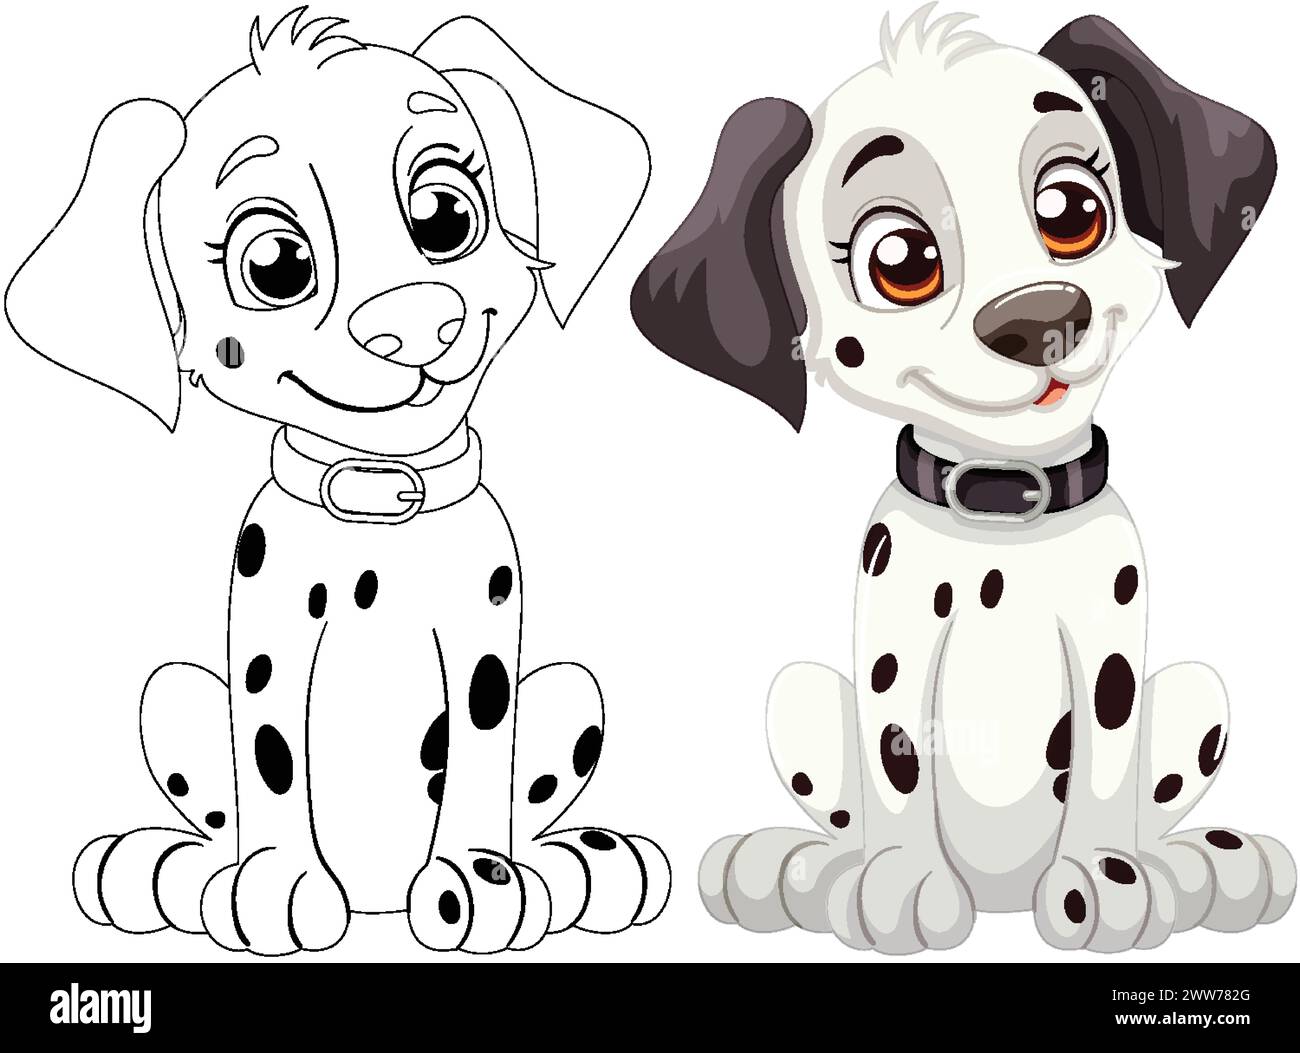 Two cute spotted Dalmatian puppies smiling. Stock Vector